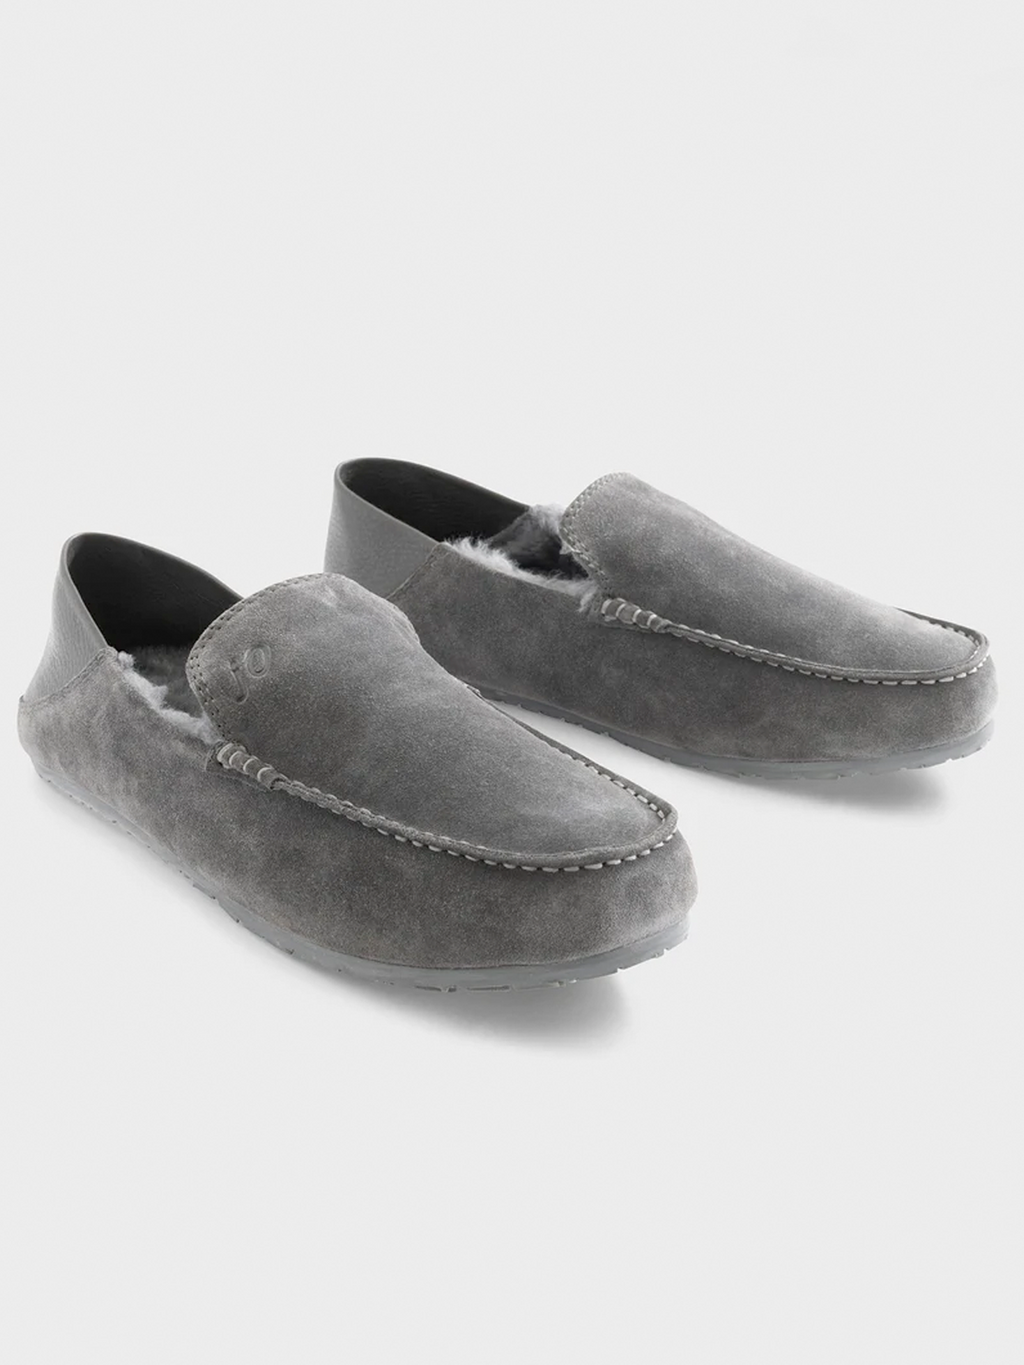 Sofa Loafer in Charcoal